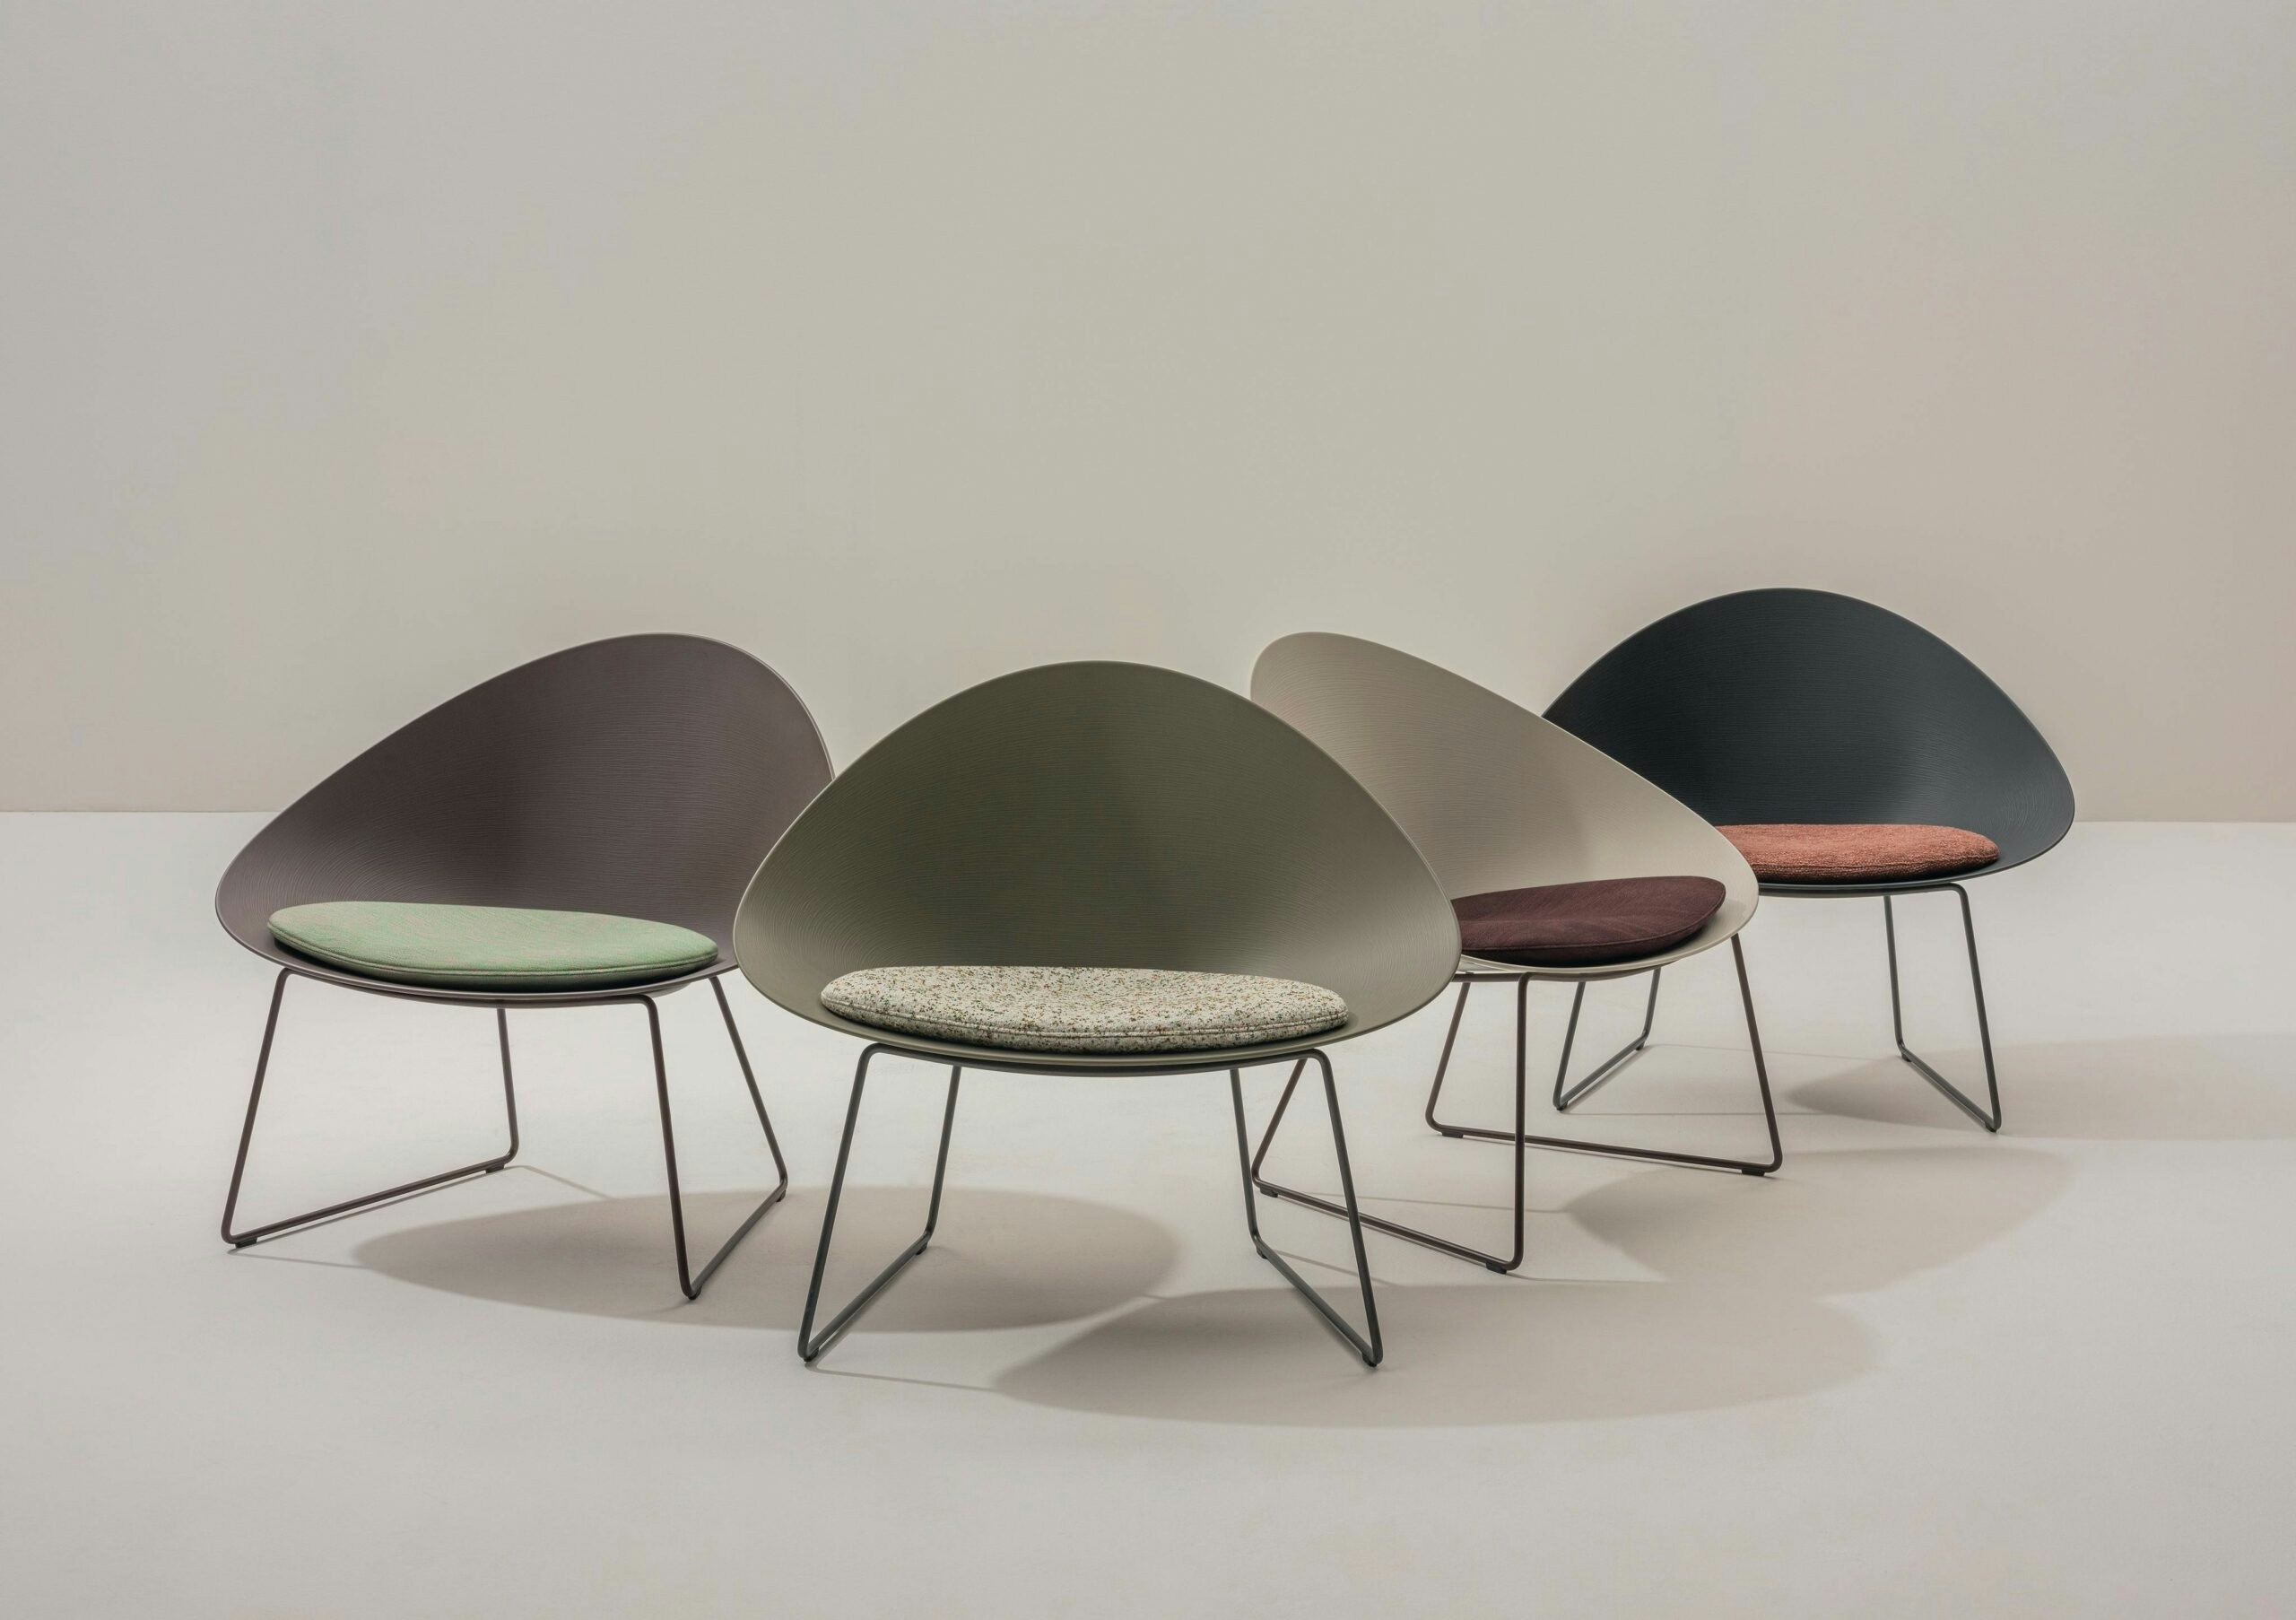 Arper chairs